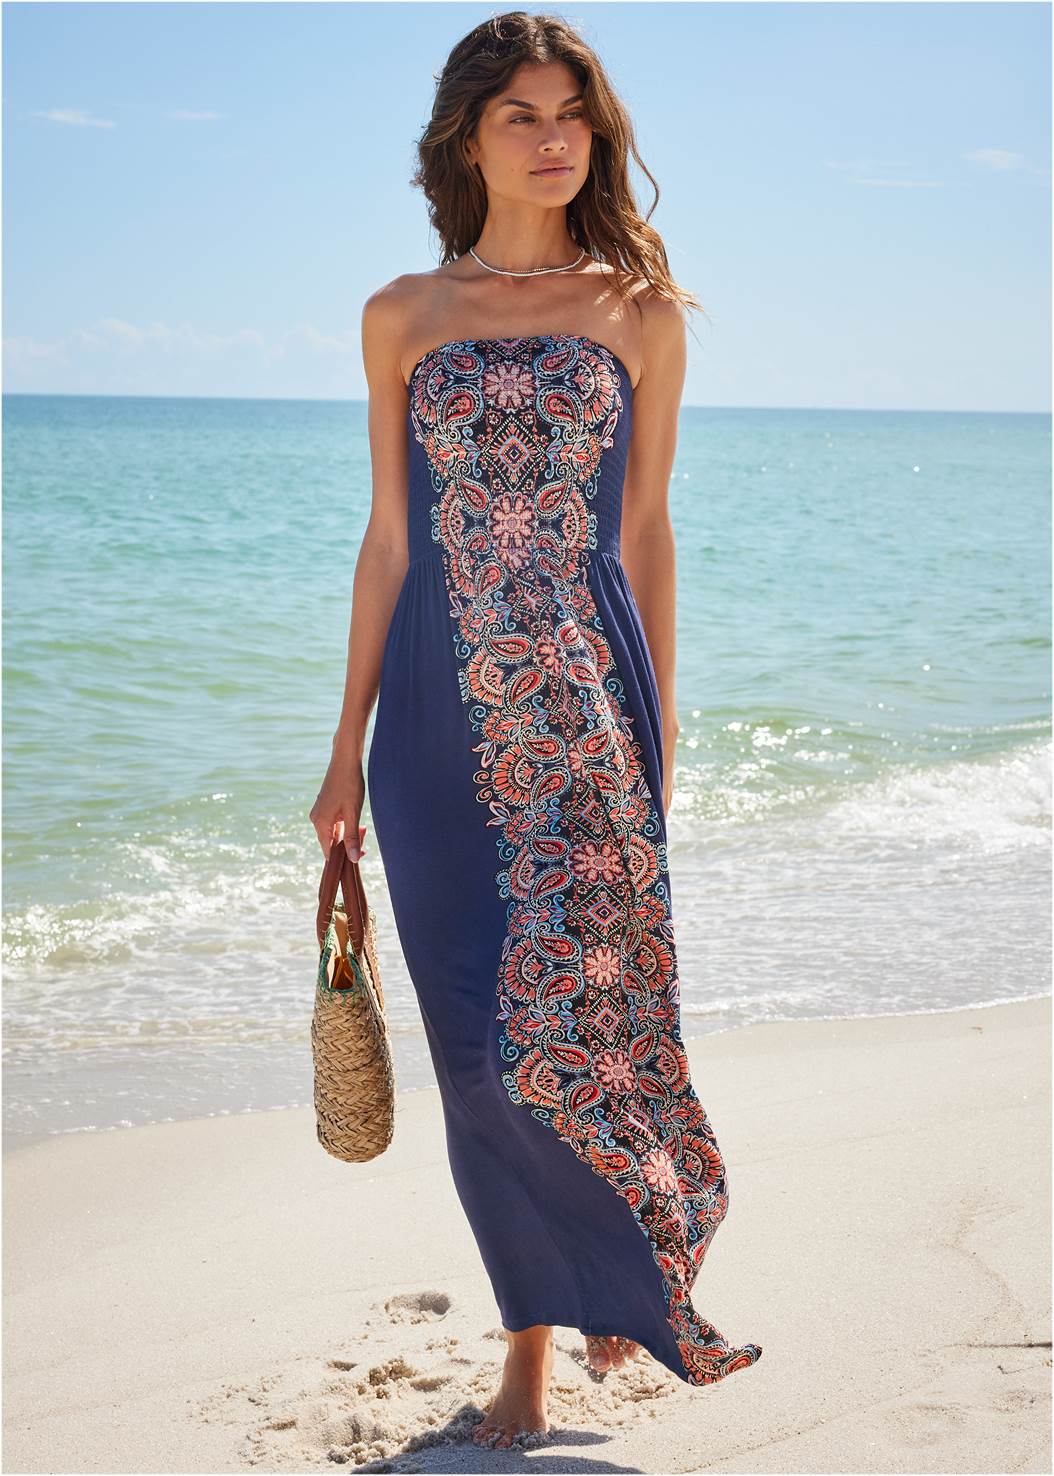 Bandeau Maxi Cover-Up Dress in Lavender Paisley Swirl | VENUS